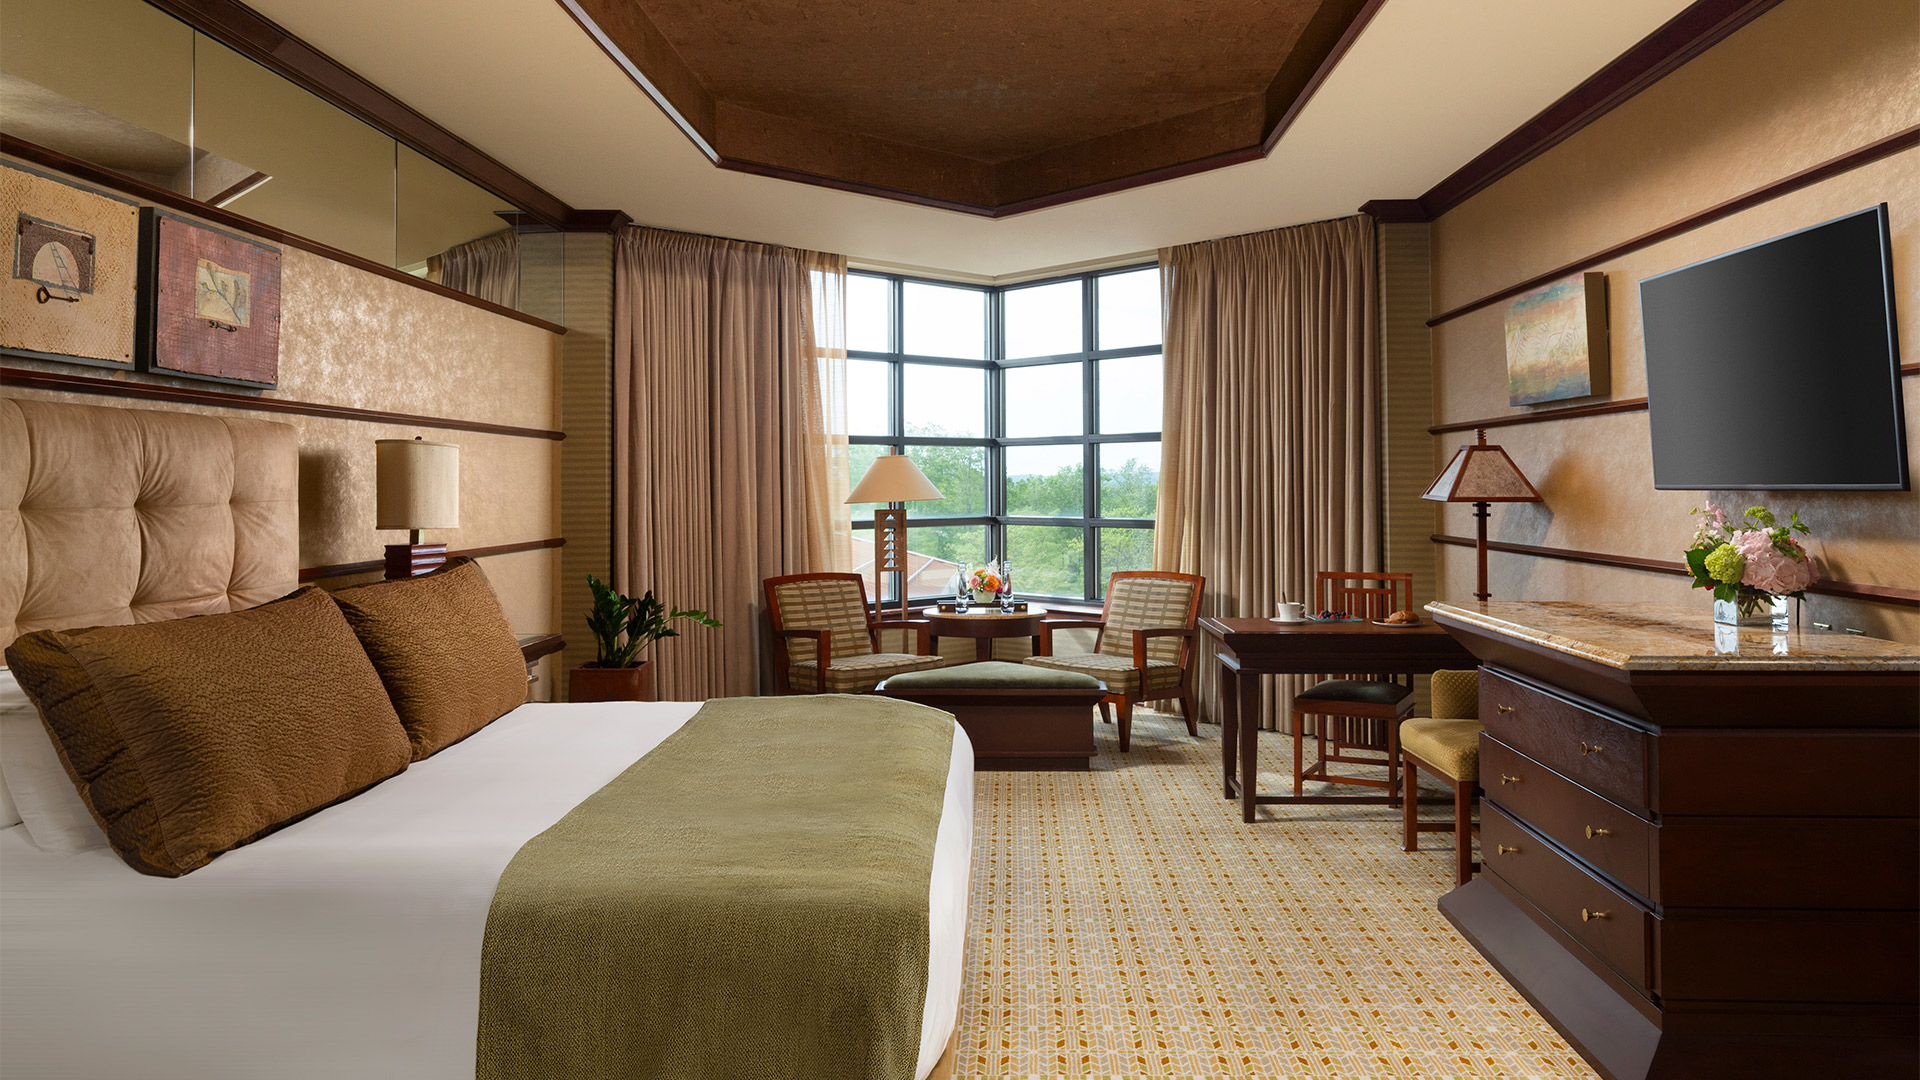 an interior shot of Falling Rock's luxury king room. There is a bed with a plush headboard and white, green and brown bedding. There is a sitting area with a table and dresser across from the bed. There are windows overlooking the resort grounds.